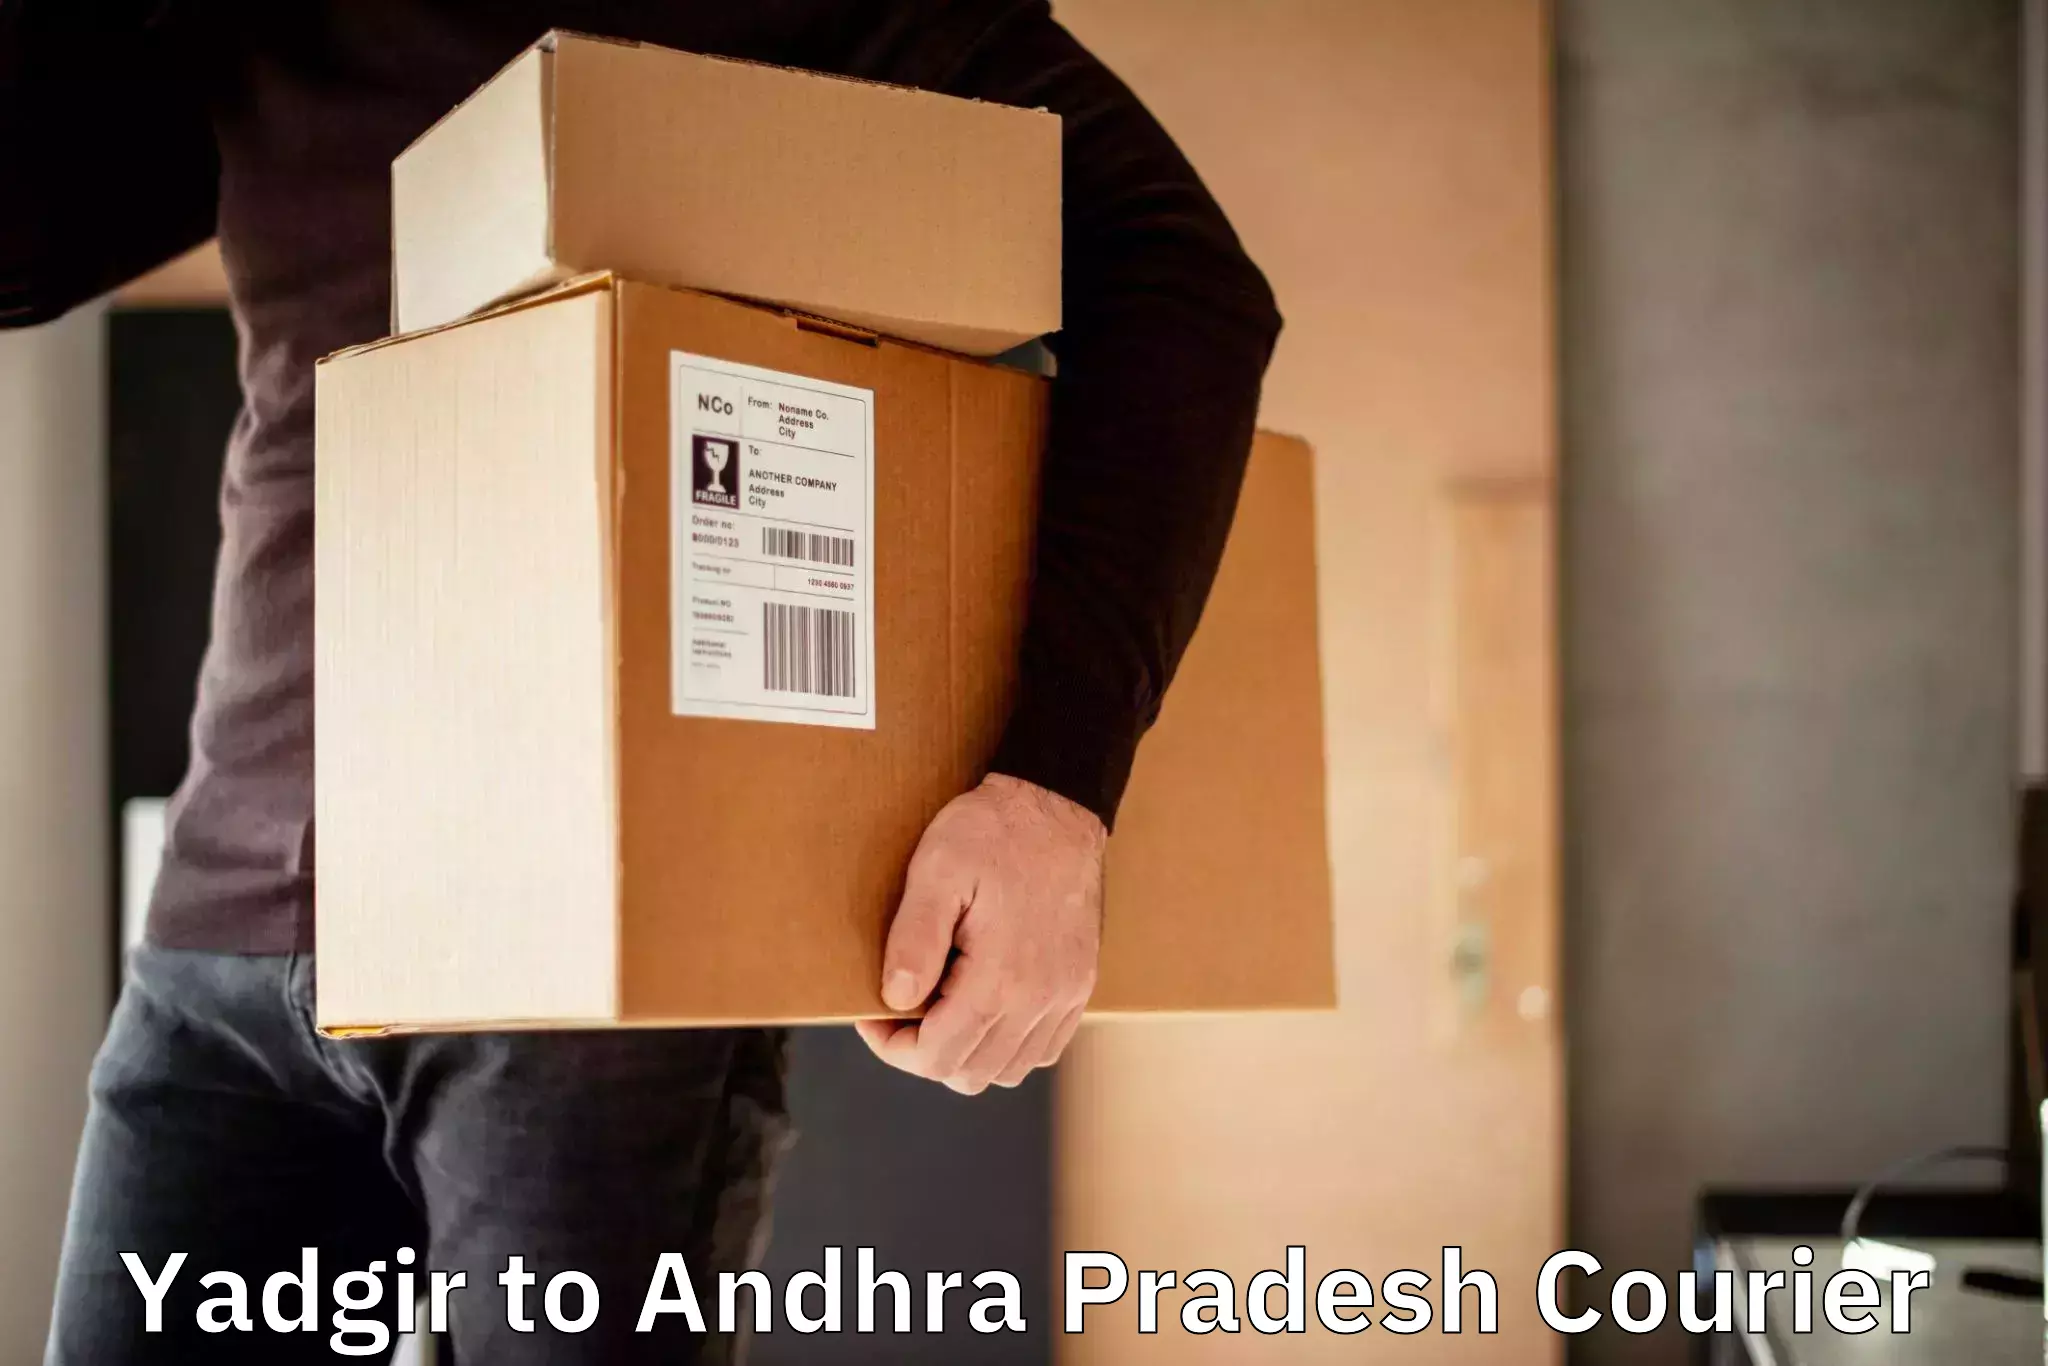 Advanced shipping technology Yadgir to Chittoor